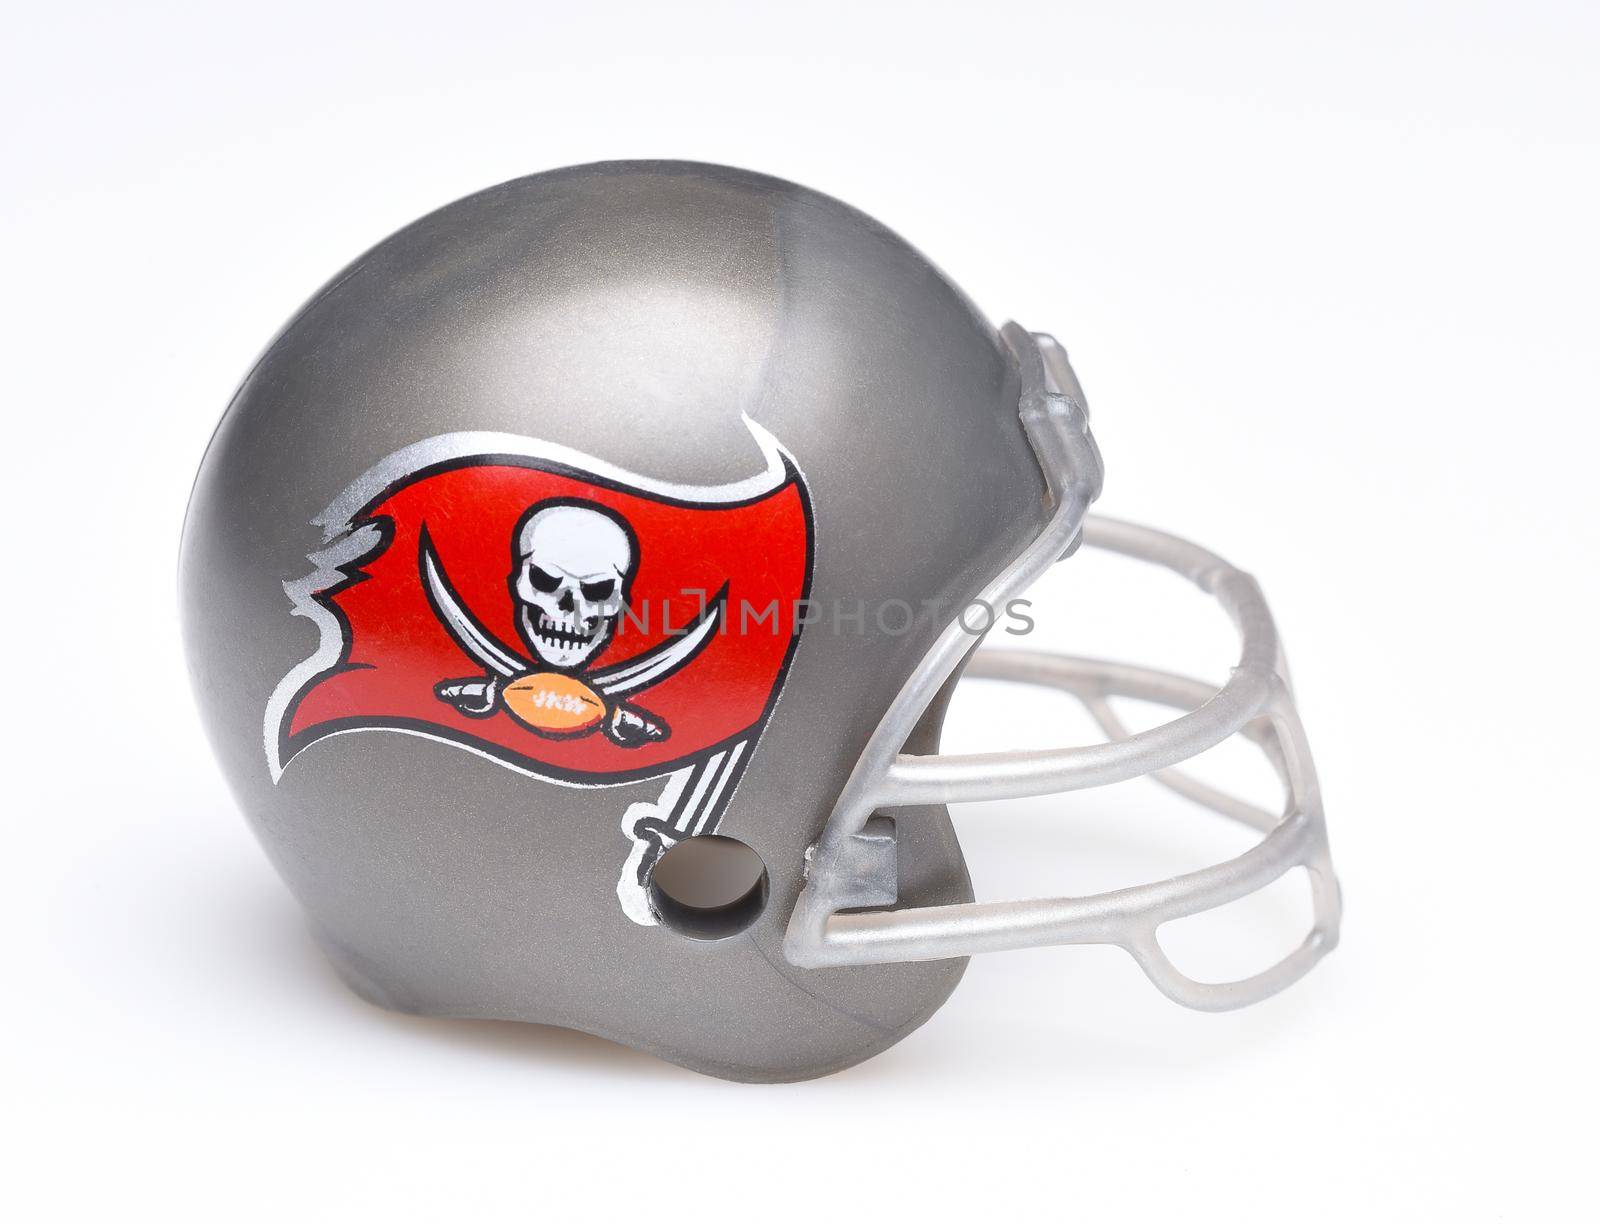 Football Helmet for the Tampa Bay Buccaneers by sCukrov